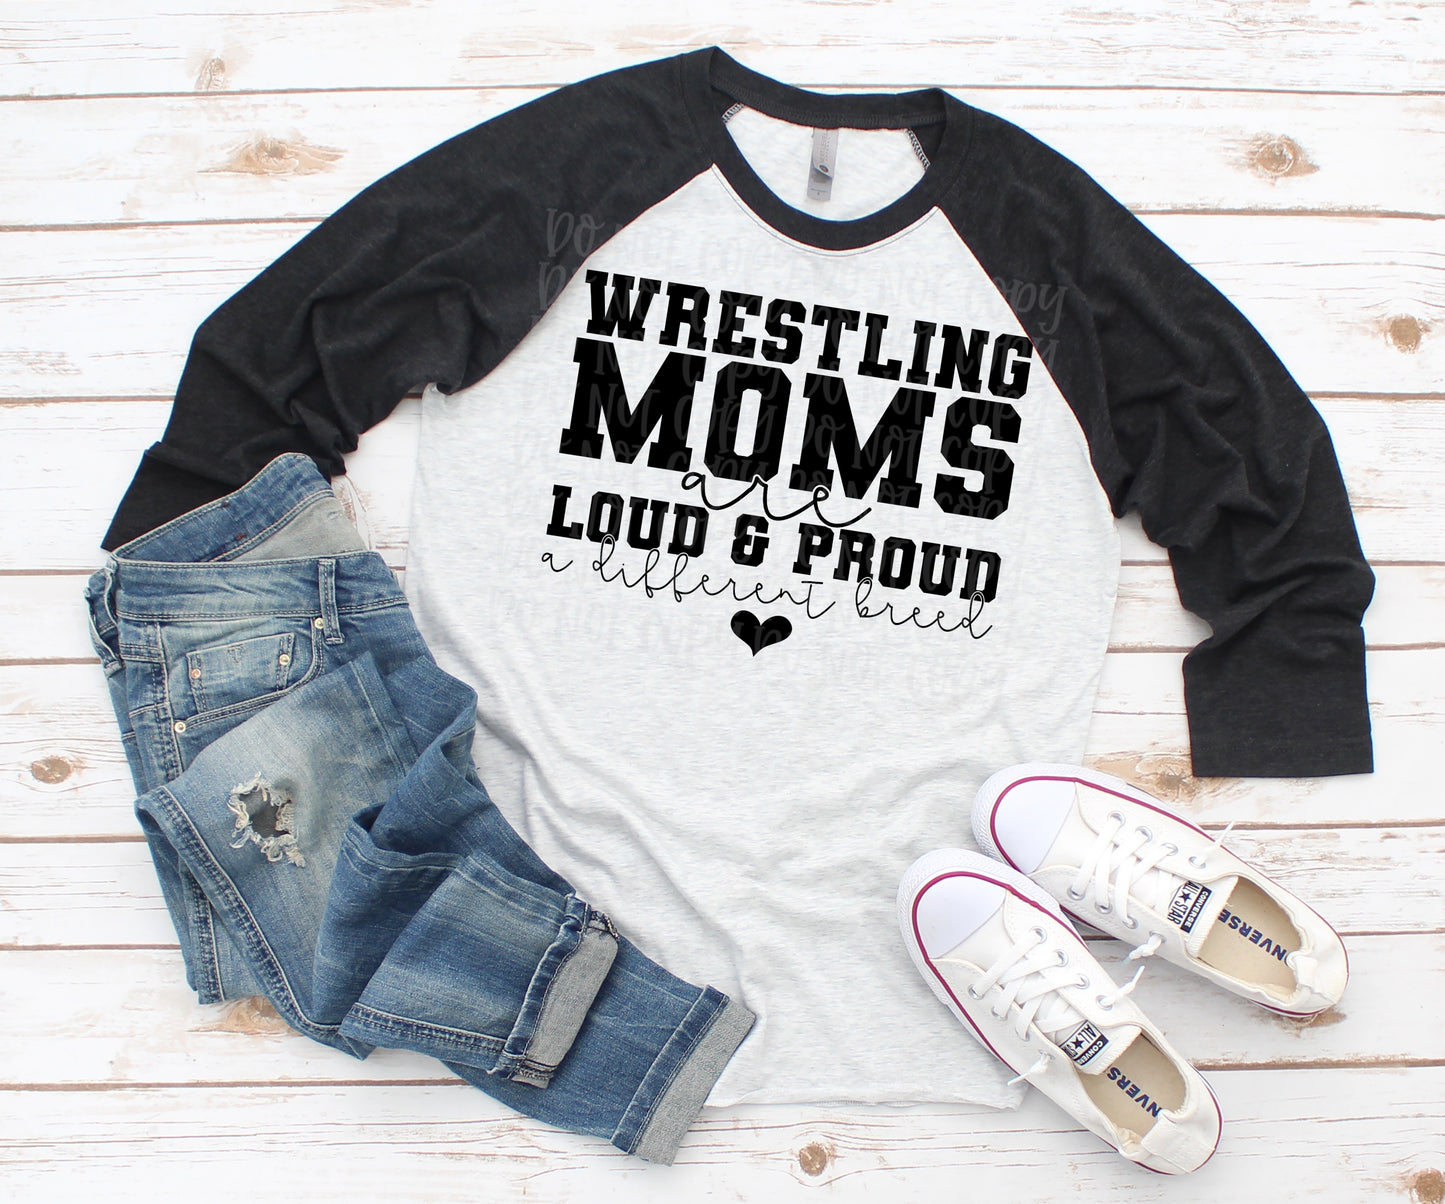 Wrestling moms -a different breed